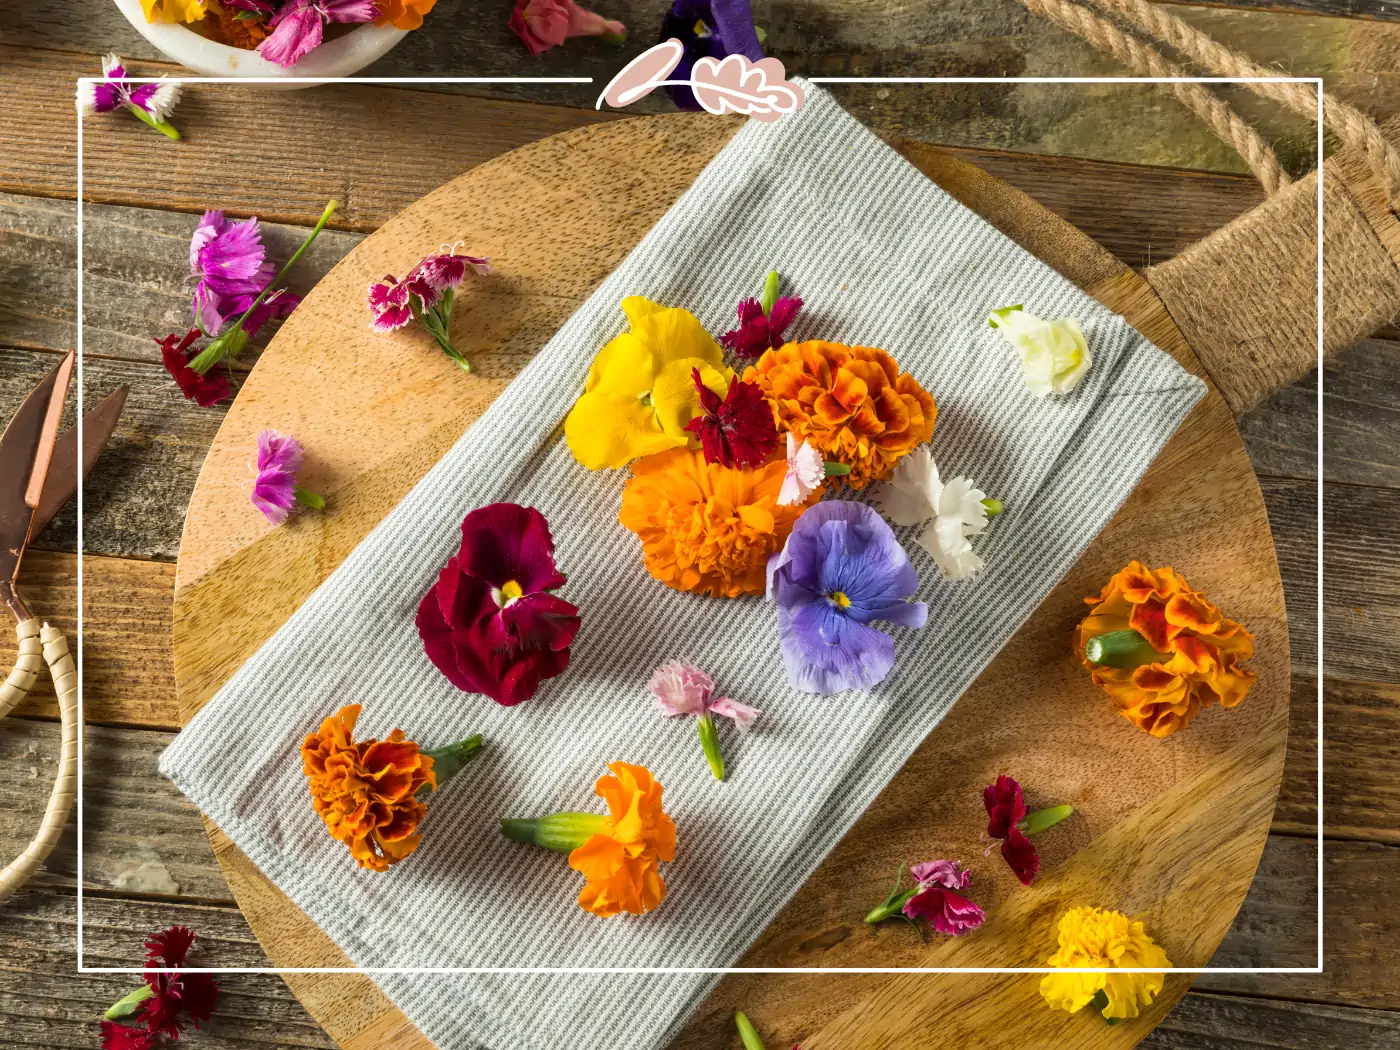 Assorted colorful edible flowers placed on a napkin. Fabulous Flowers and Gifts.